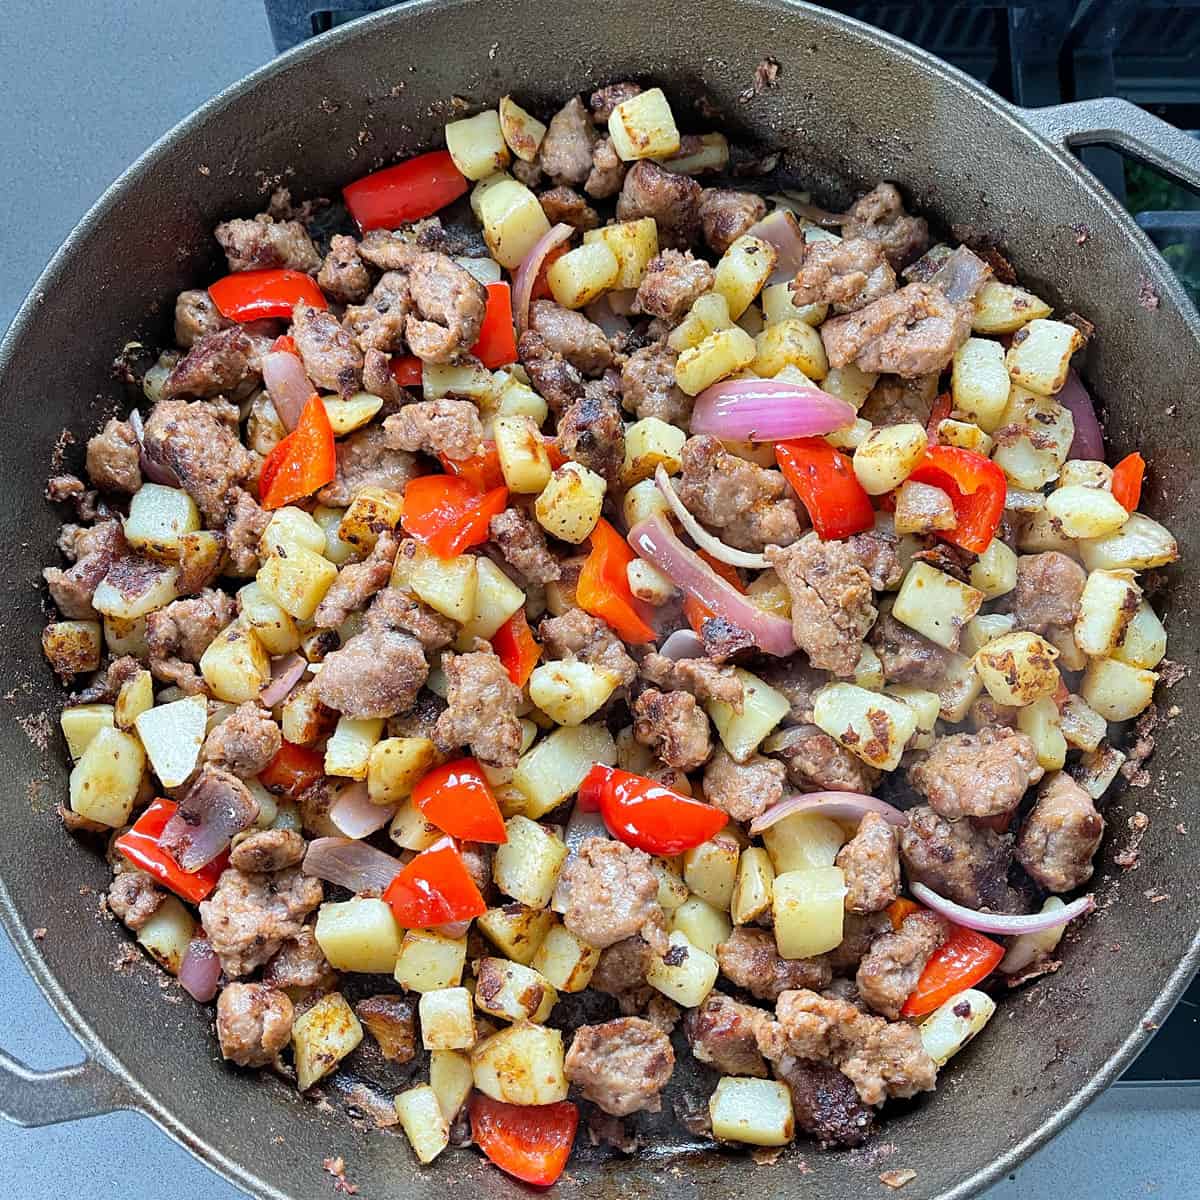 Pan fried potatoes, sausages, red onion and capsicum in a large skillet.